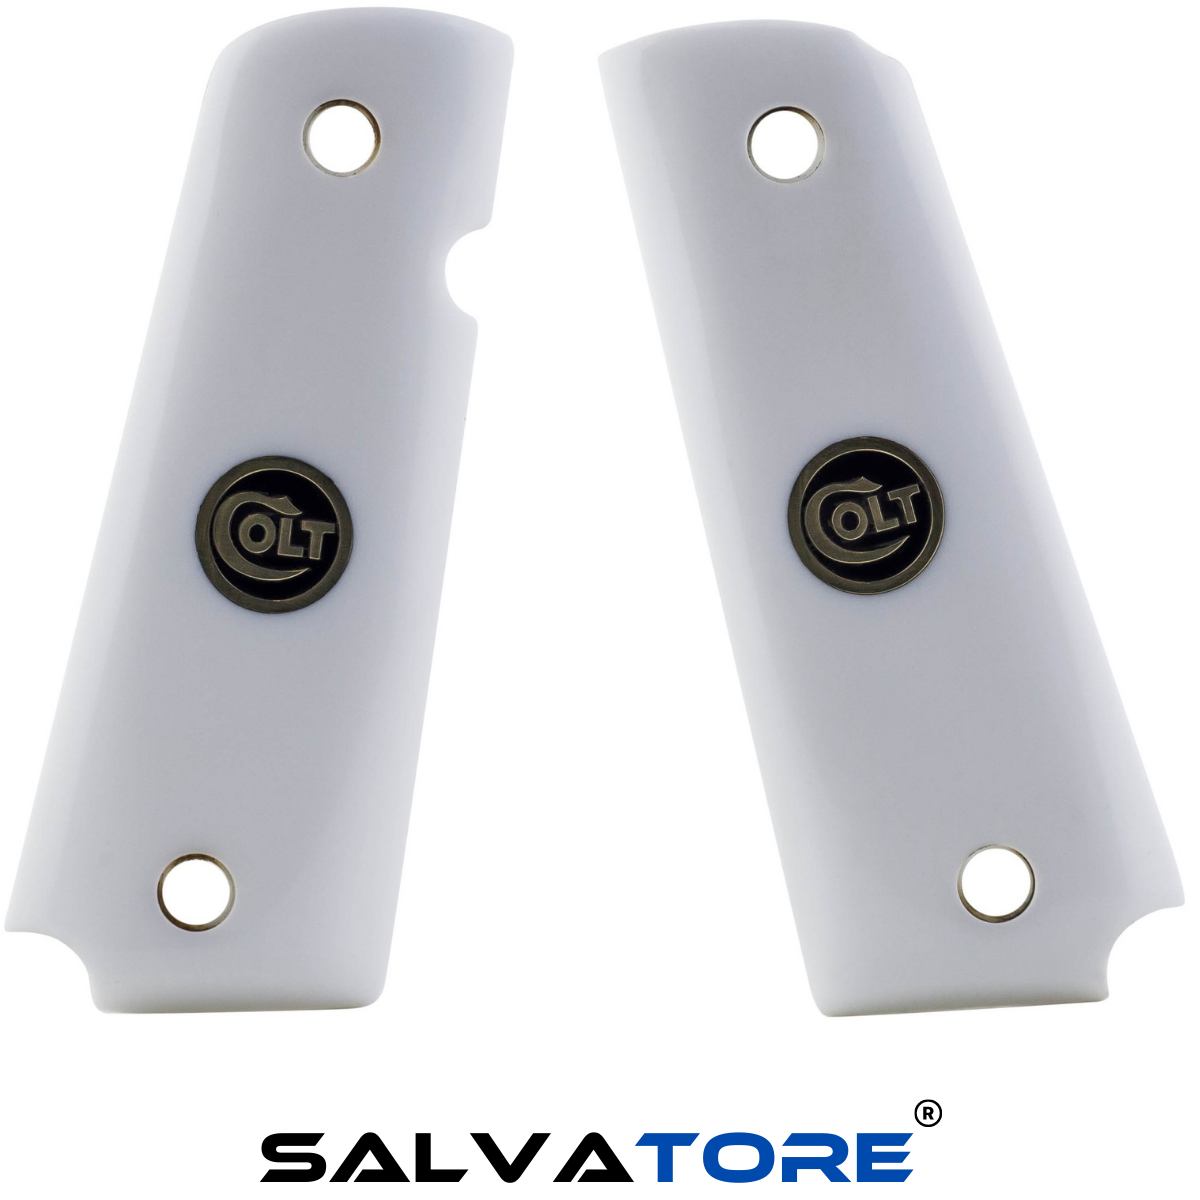 Salvatore Pistol Grips Revolver Grips For Colt 1911 Acrylic Gun Accessories Hunting Shooting